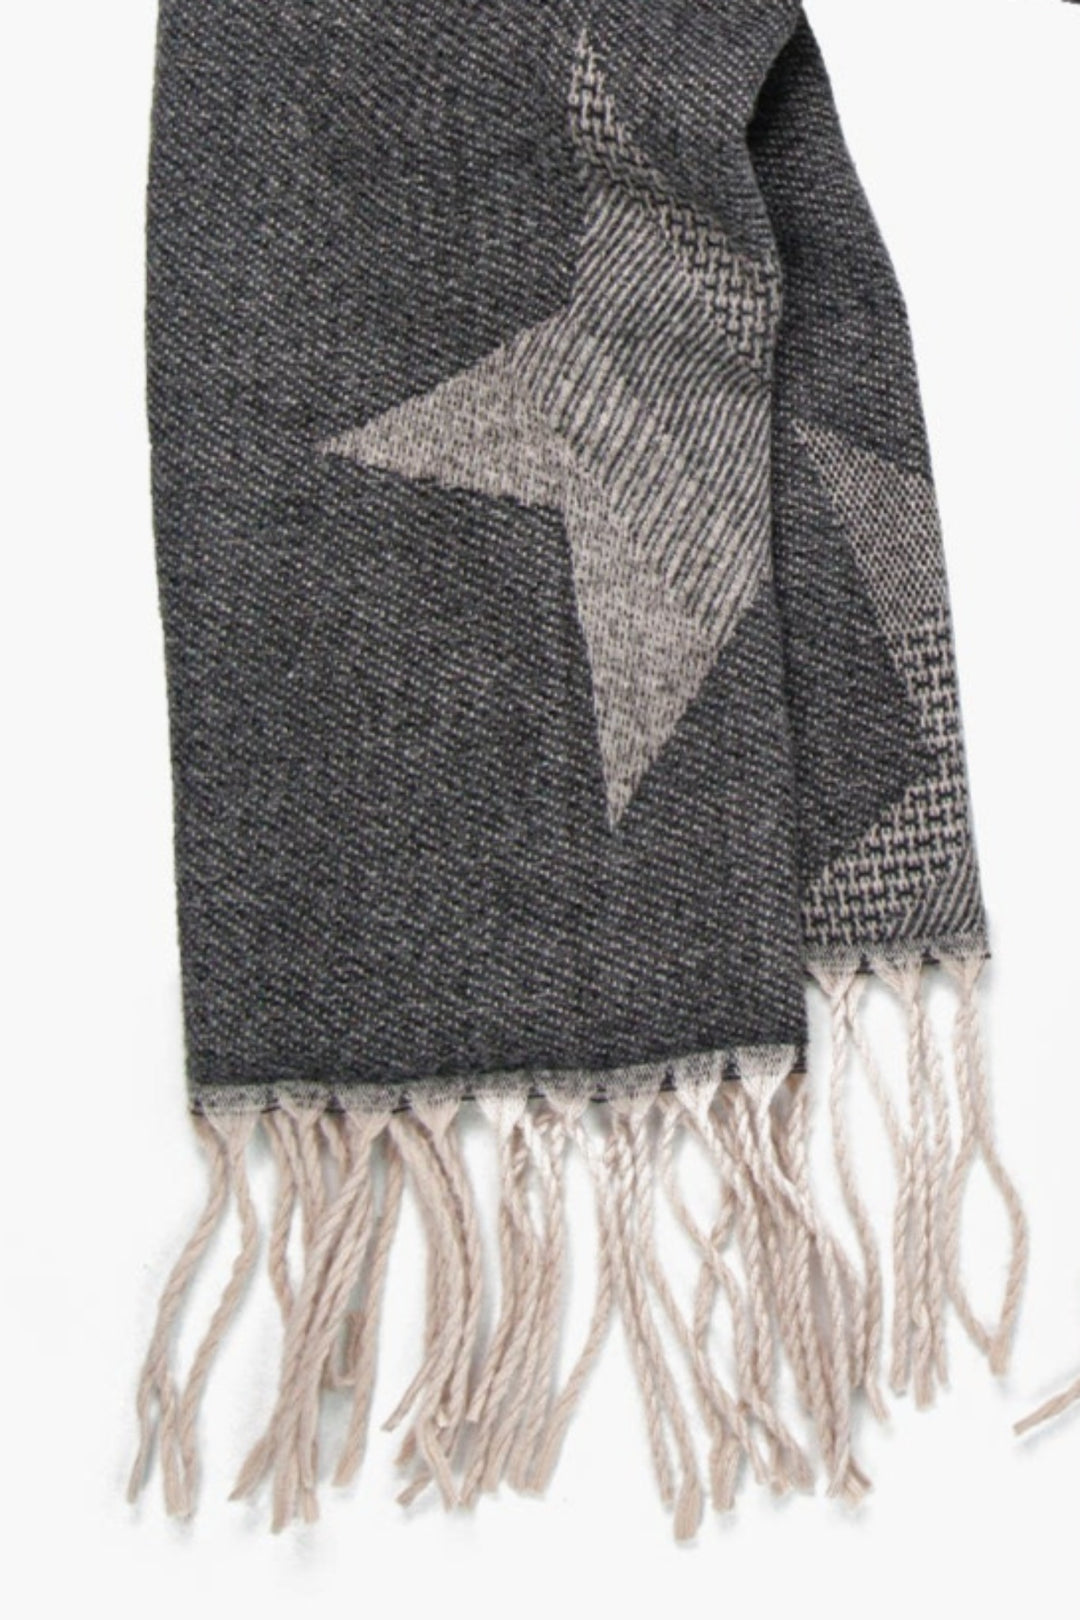 Black Large Ombre Star Print Heavyweight Scarf